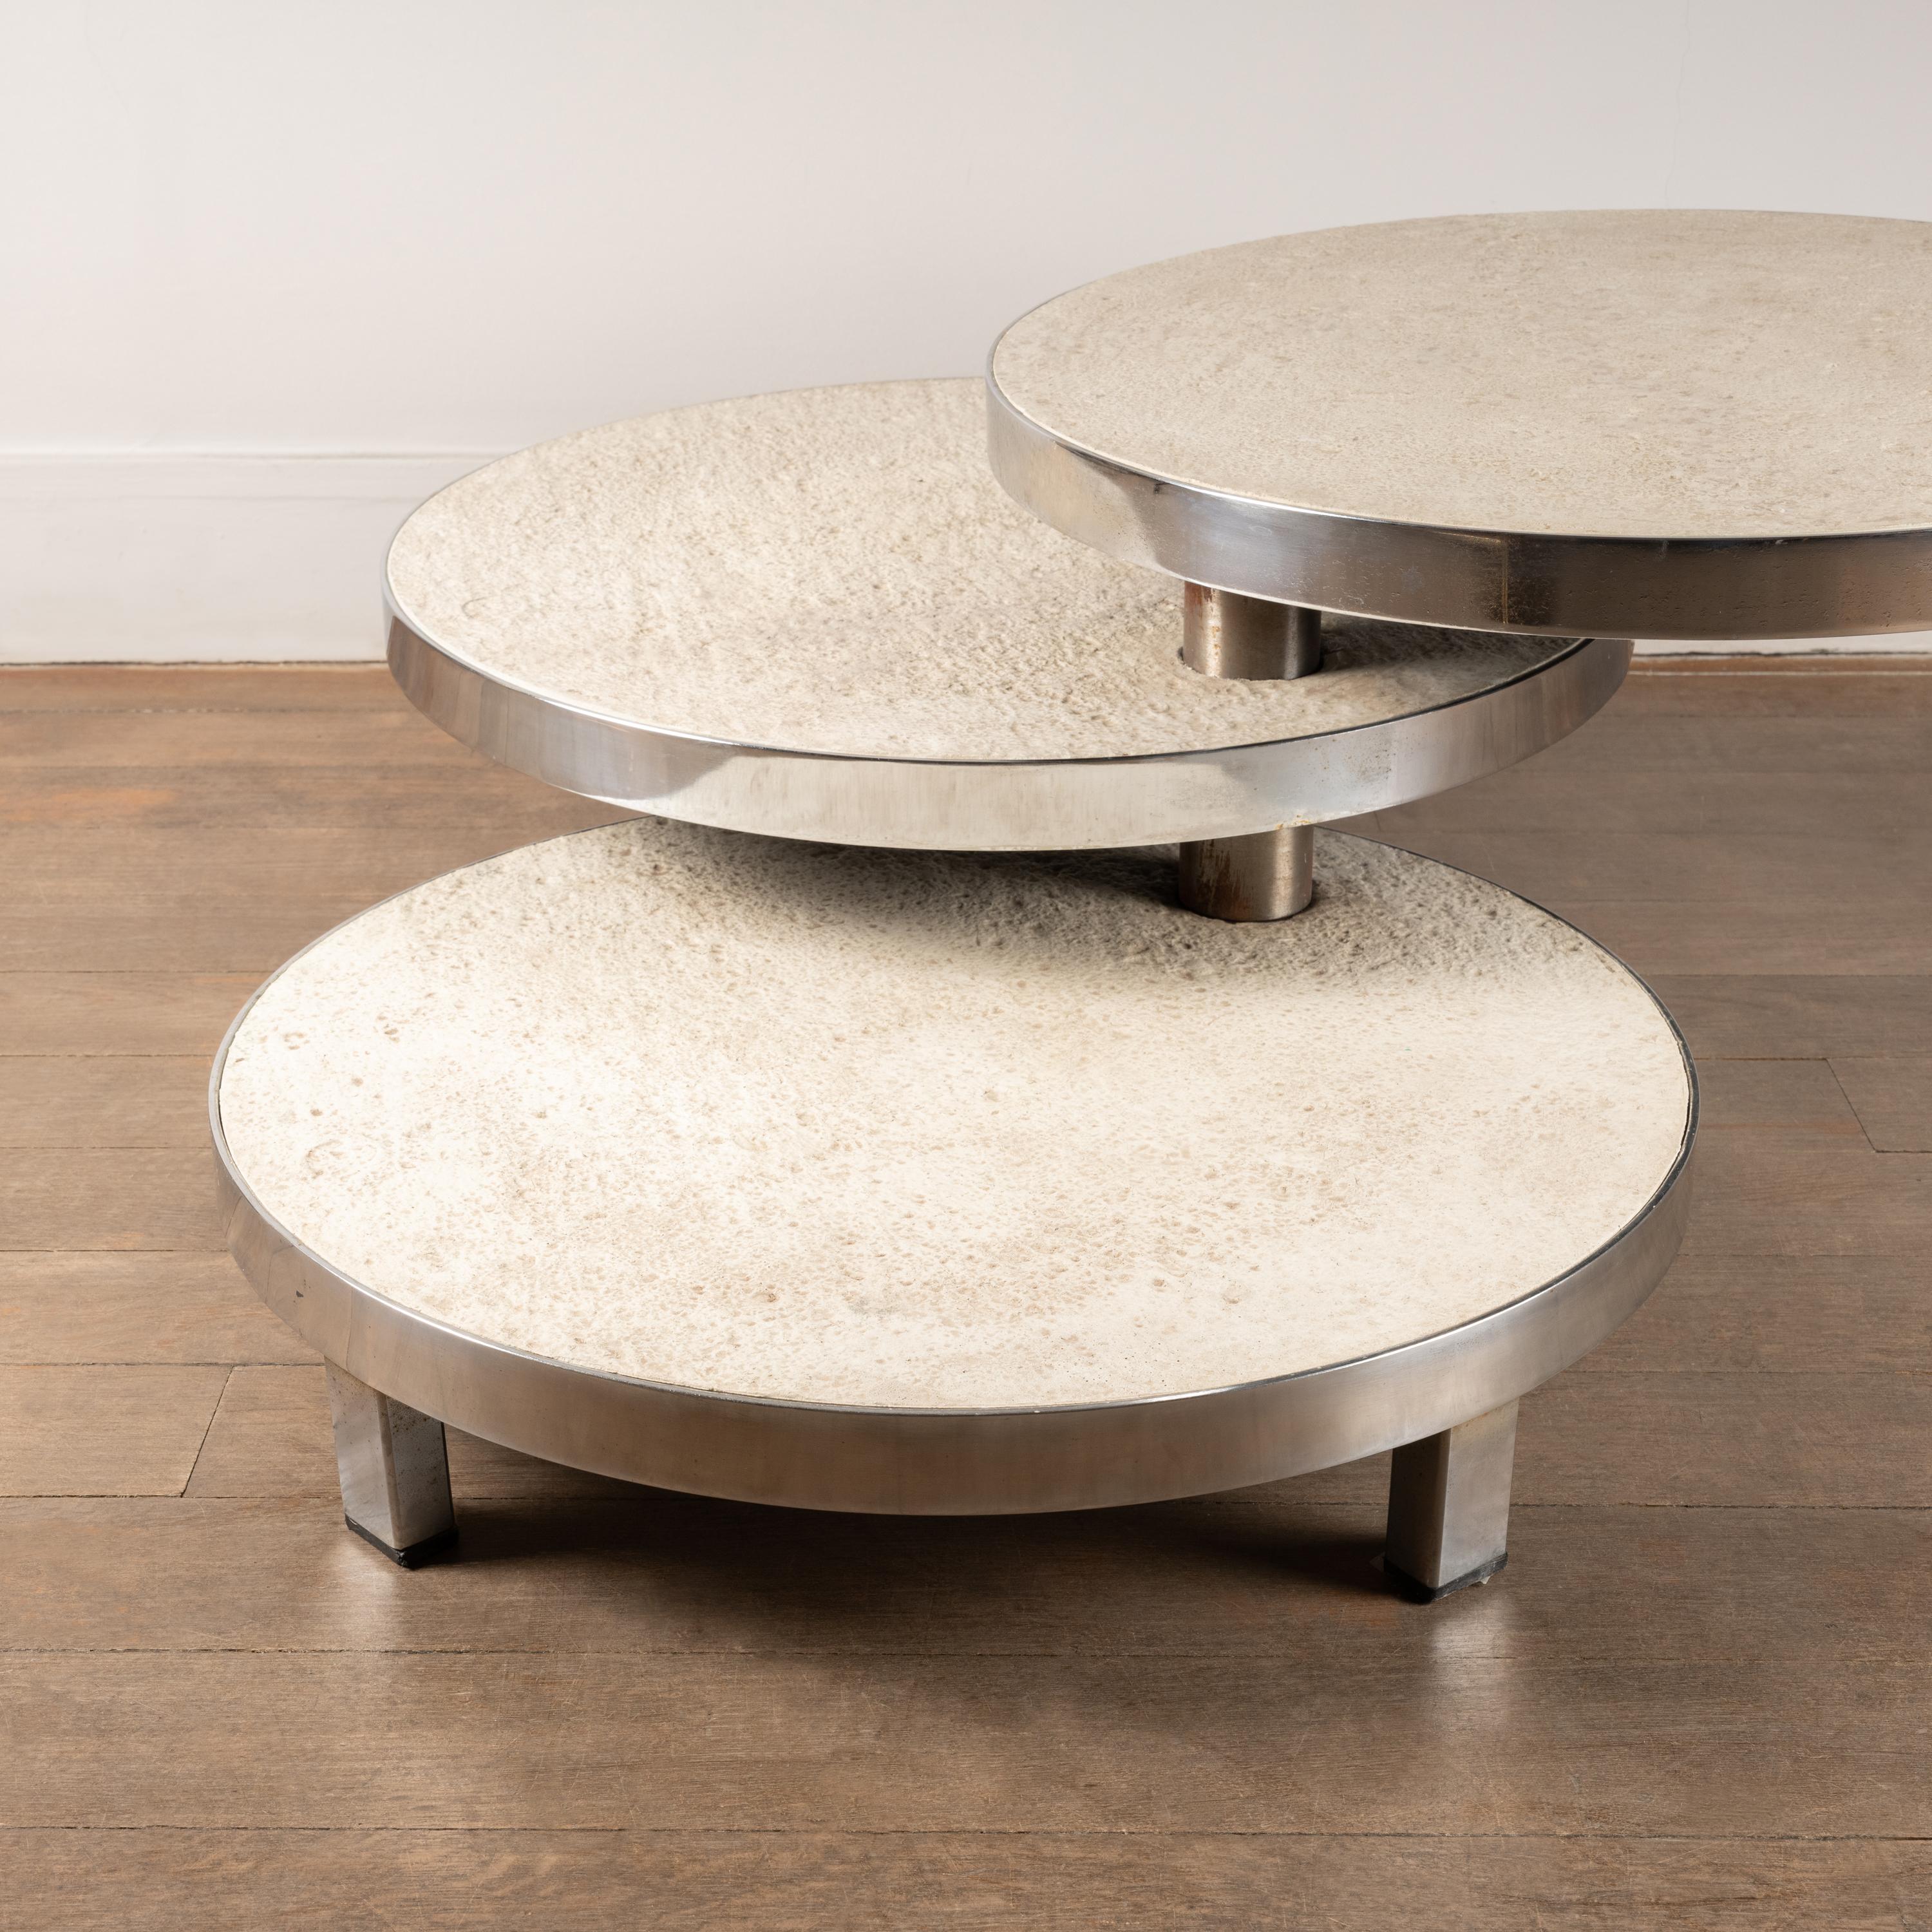 Side table, Maria Pergay design for Mercier Frères circa 1968.
Three 180 degree swivel trays. 
Structure in chromed steel and wooden trays in imitation stone resin.
France, circa 1960.

Dimensions: 

Height 35 cm / 13,77 inch 
Diameter 60 cm